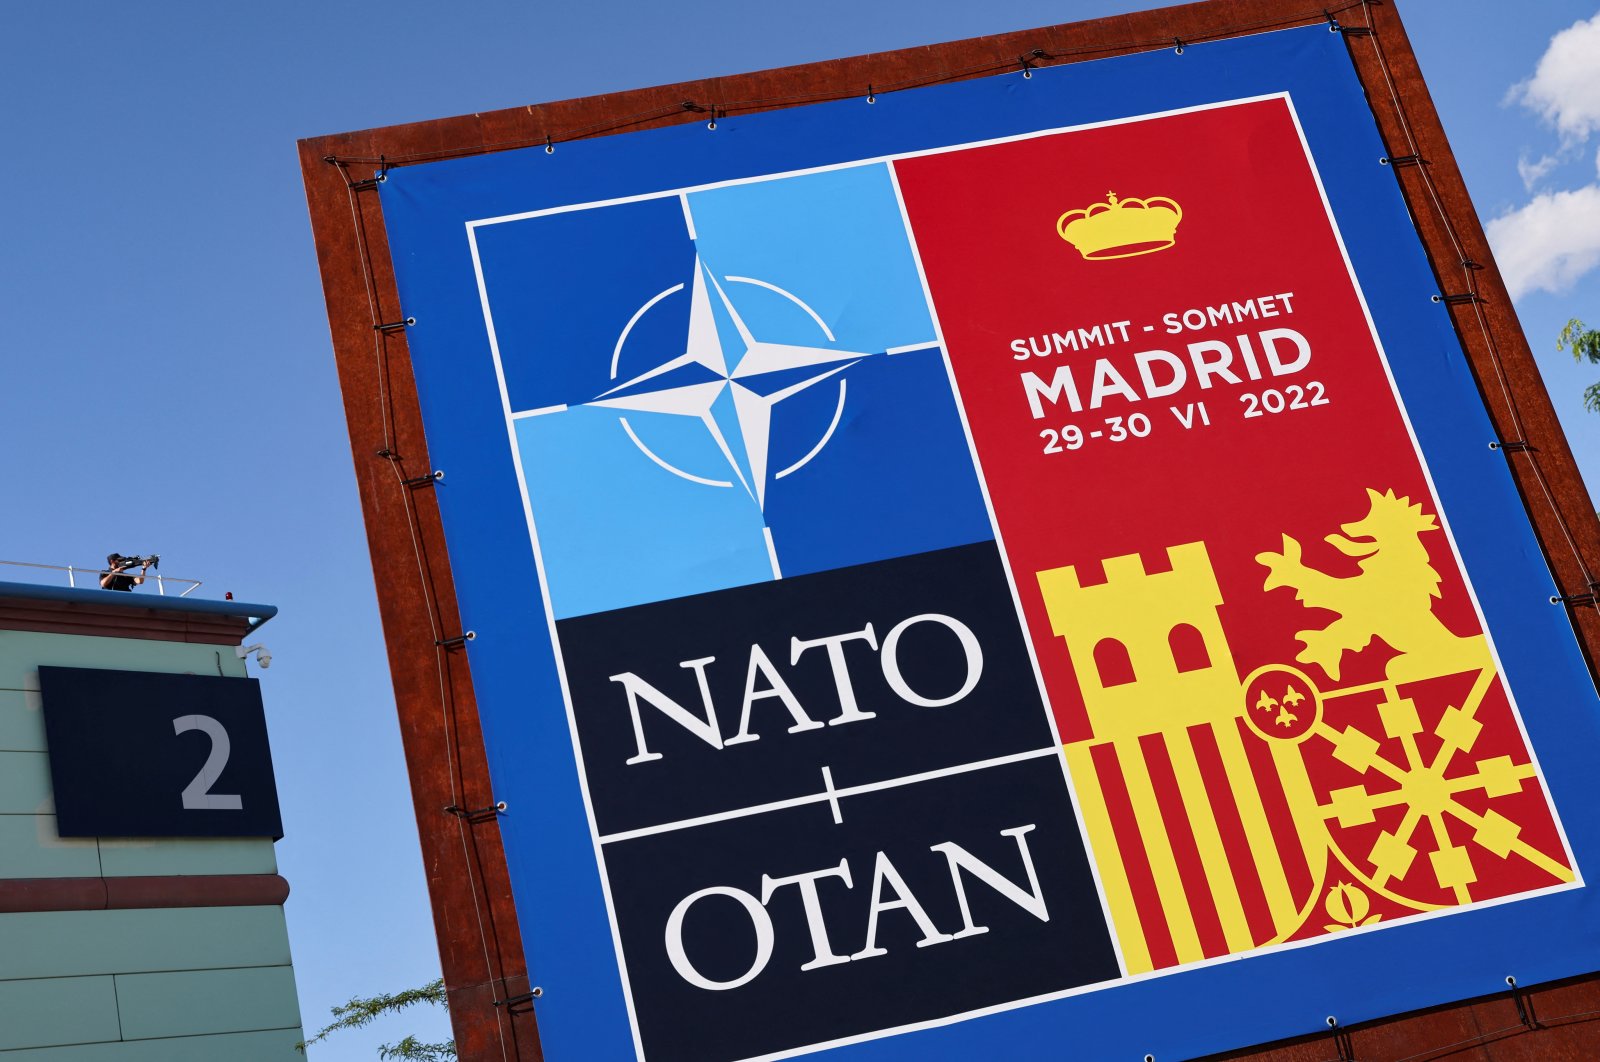 A sign for the NATO summit is seen in Madrid, Spain, June 27, 2022. (Reuters Photo)